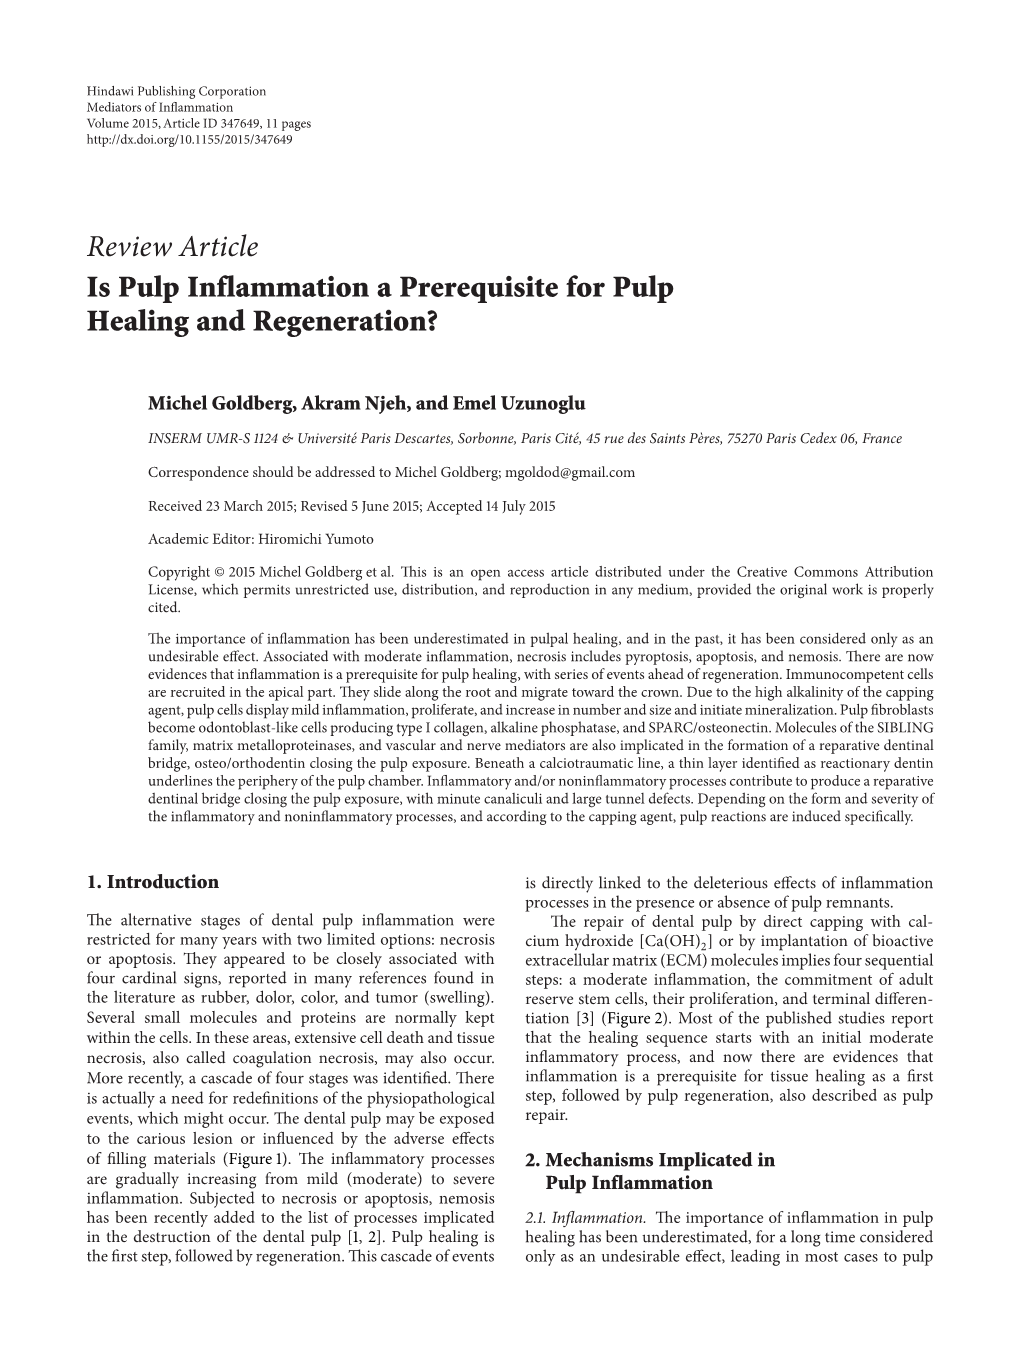 Review Article Is Pulp Inflammation a Prerequisite for Pulp Healing and Regeneration?